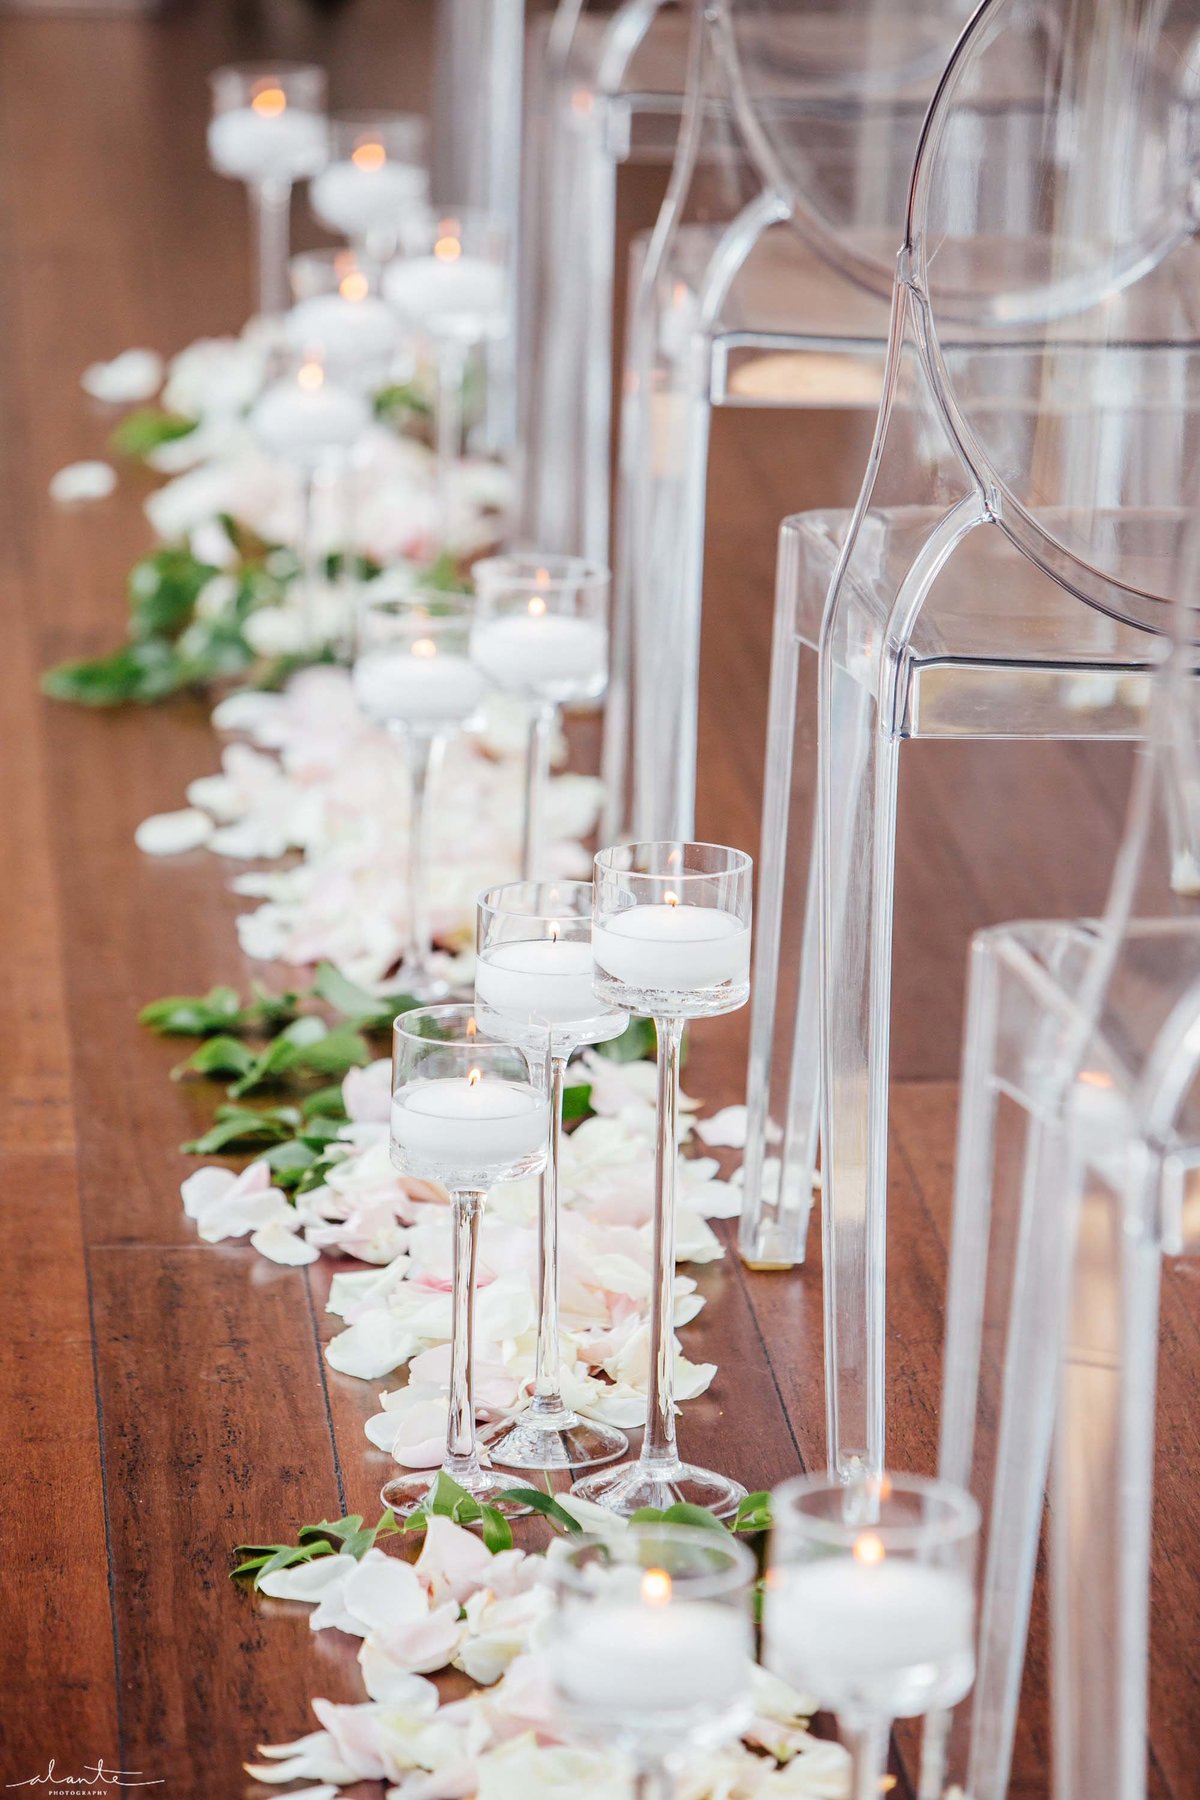 Stemmed hurricane candles and rose petals line the aisle of this wedding ceremony.